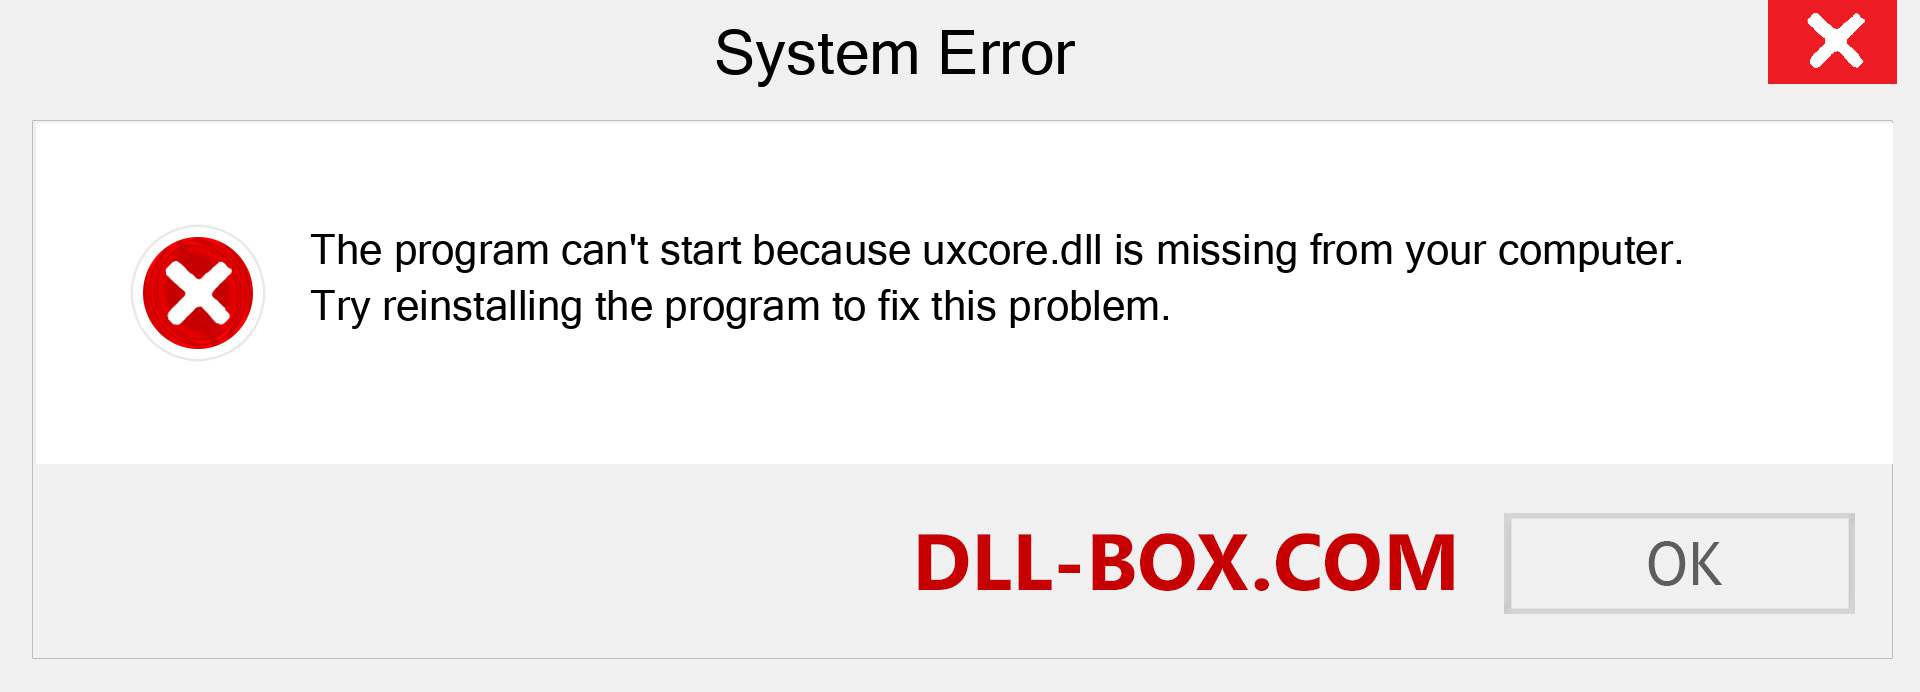  uxcore.dll file is missing?. Download for Windows 7, 8, 10 - Fix  uxcore dll Missing Error on Windows, photos, images